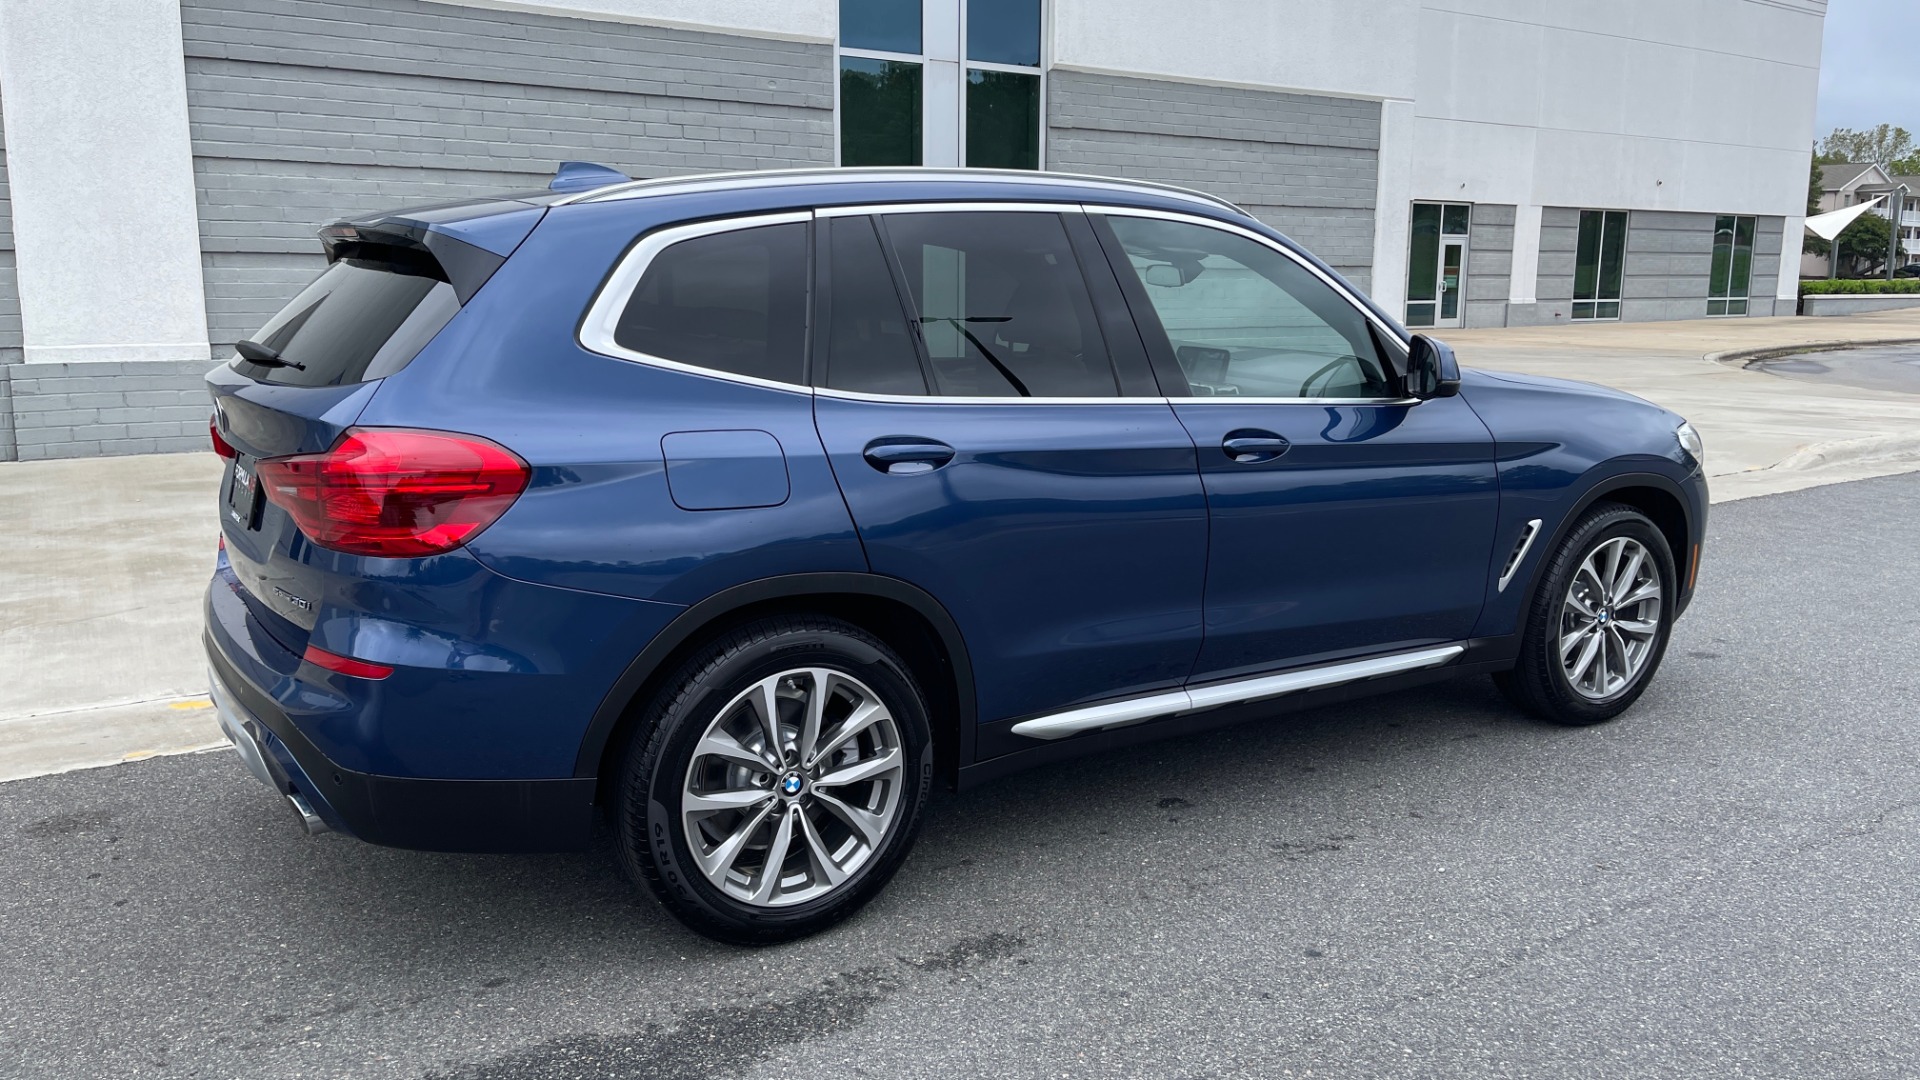 Used 2019 BMW X3 SDRIVE30I / NAV / PANO-ROOF / DRVR ASST / 19IN WHEELS / REARVIEW for sale Sold at Formula Imports in Charlotte NC 28227 2